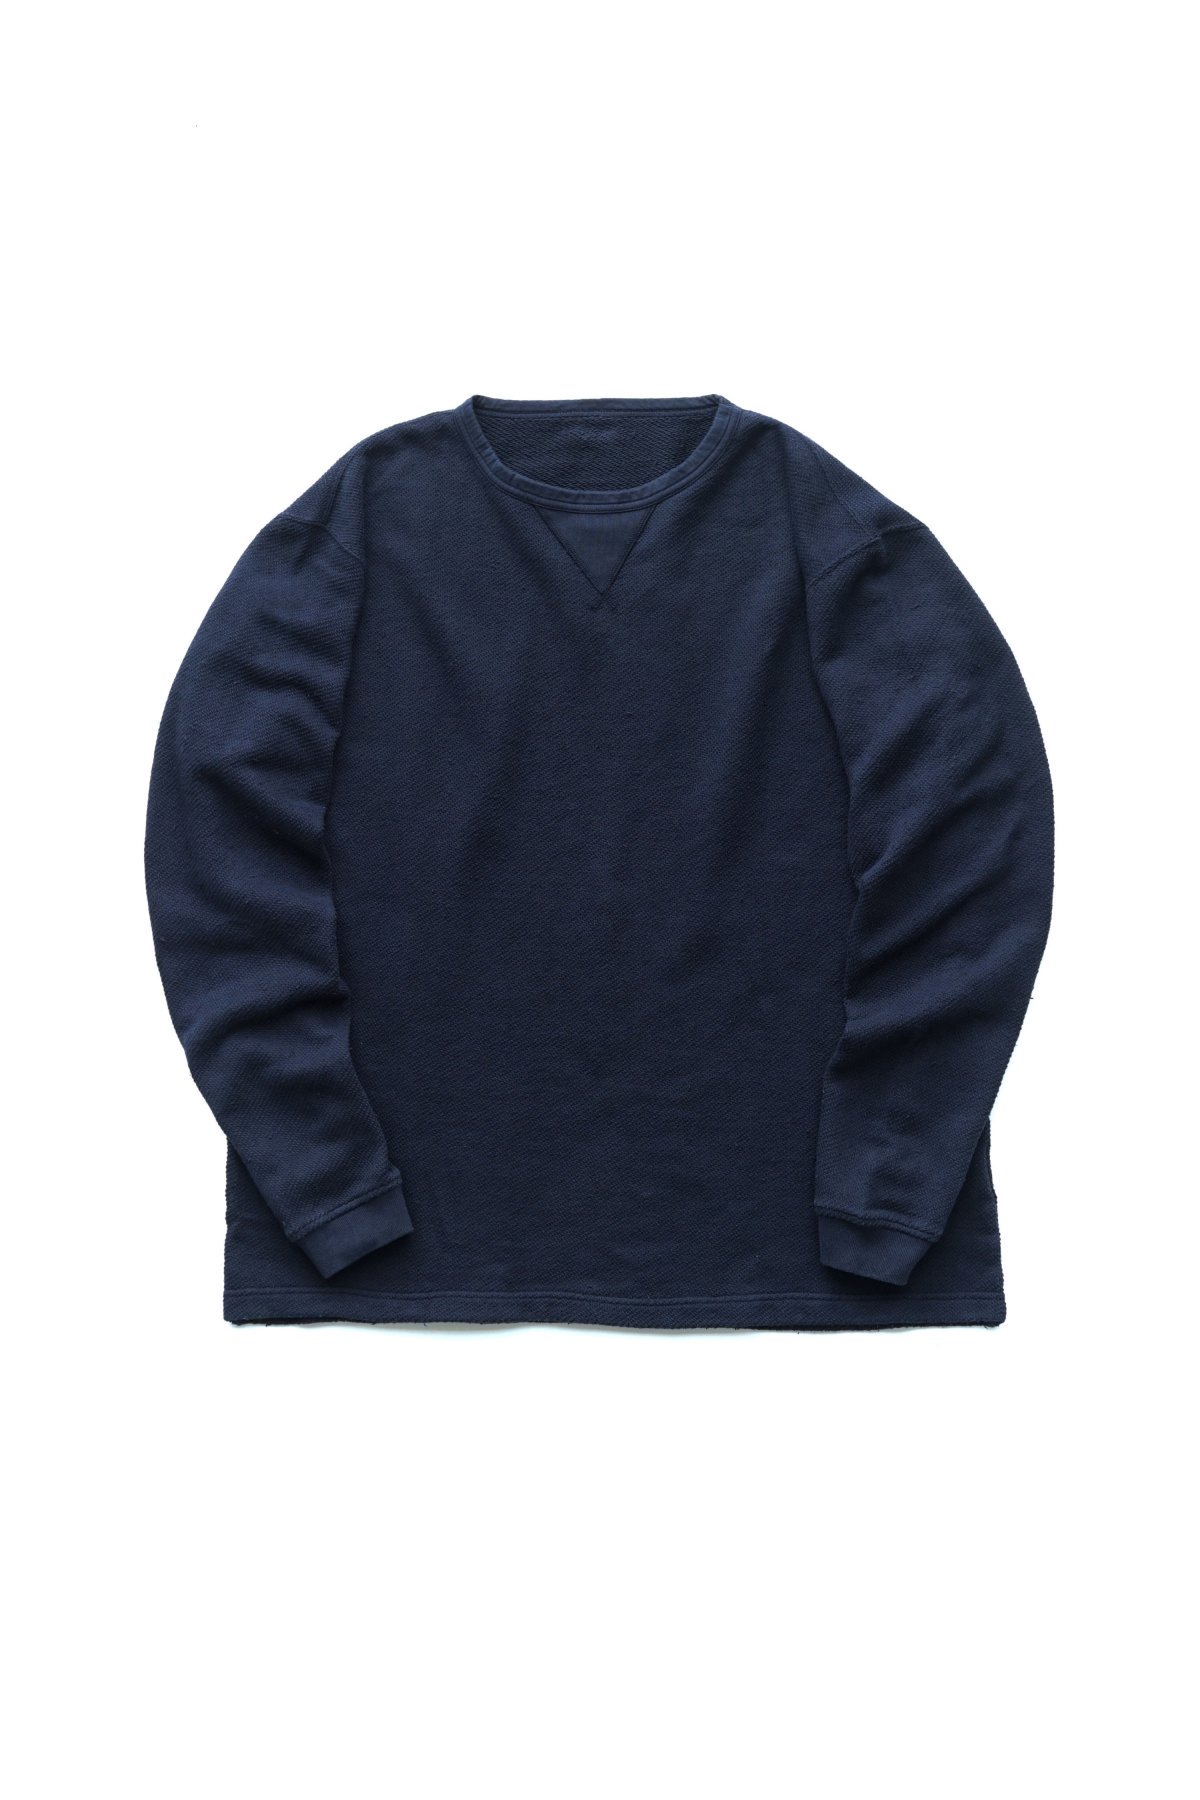 Porter Classic - FRENCH THERMAL CREWNECK - BLUE ポータークラシック